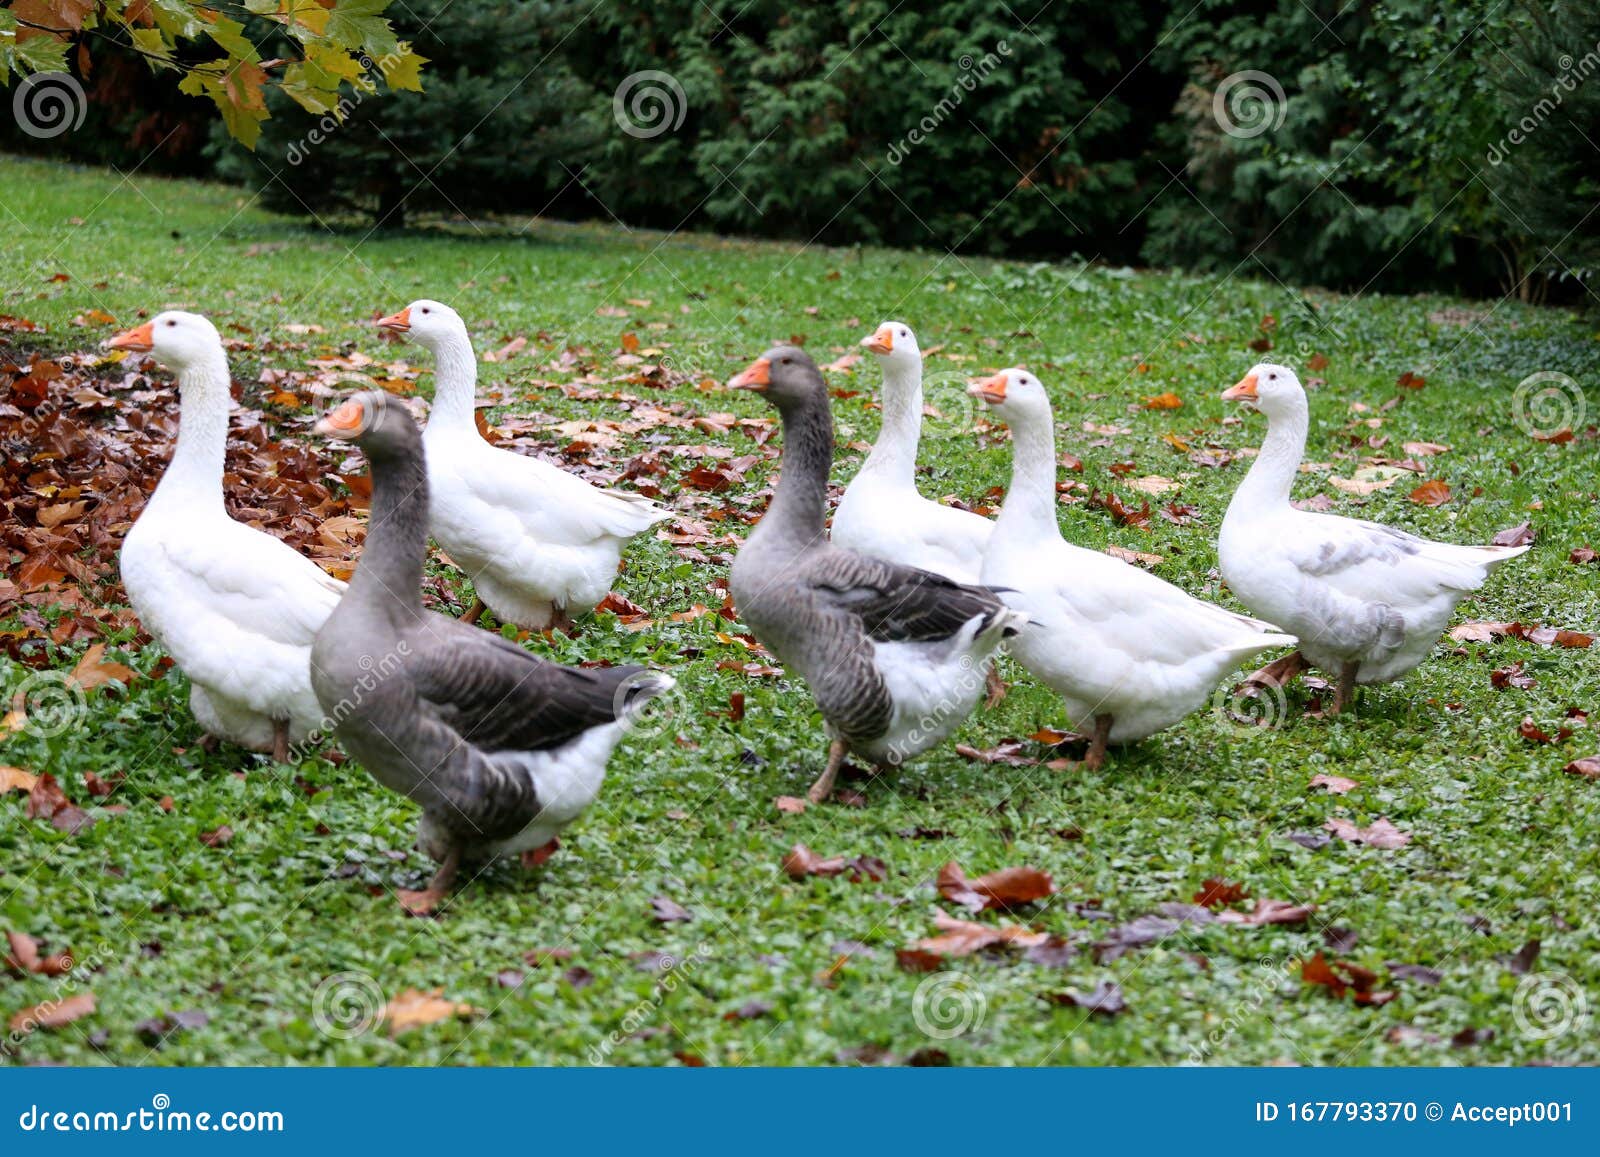 Closeup of White and Grey Adult Geese on Farm Yard. Domestic Goose Live at  Beautiful Animal Farm Stock Photo - Image of countryside, farmland:  167793370